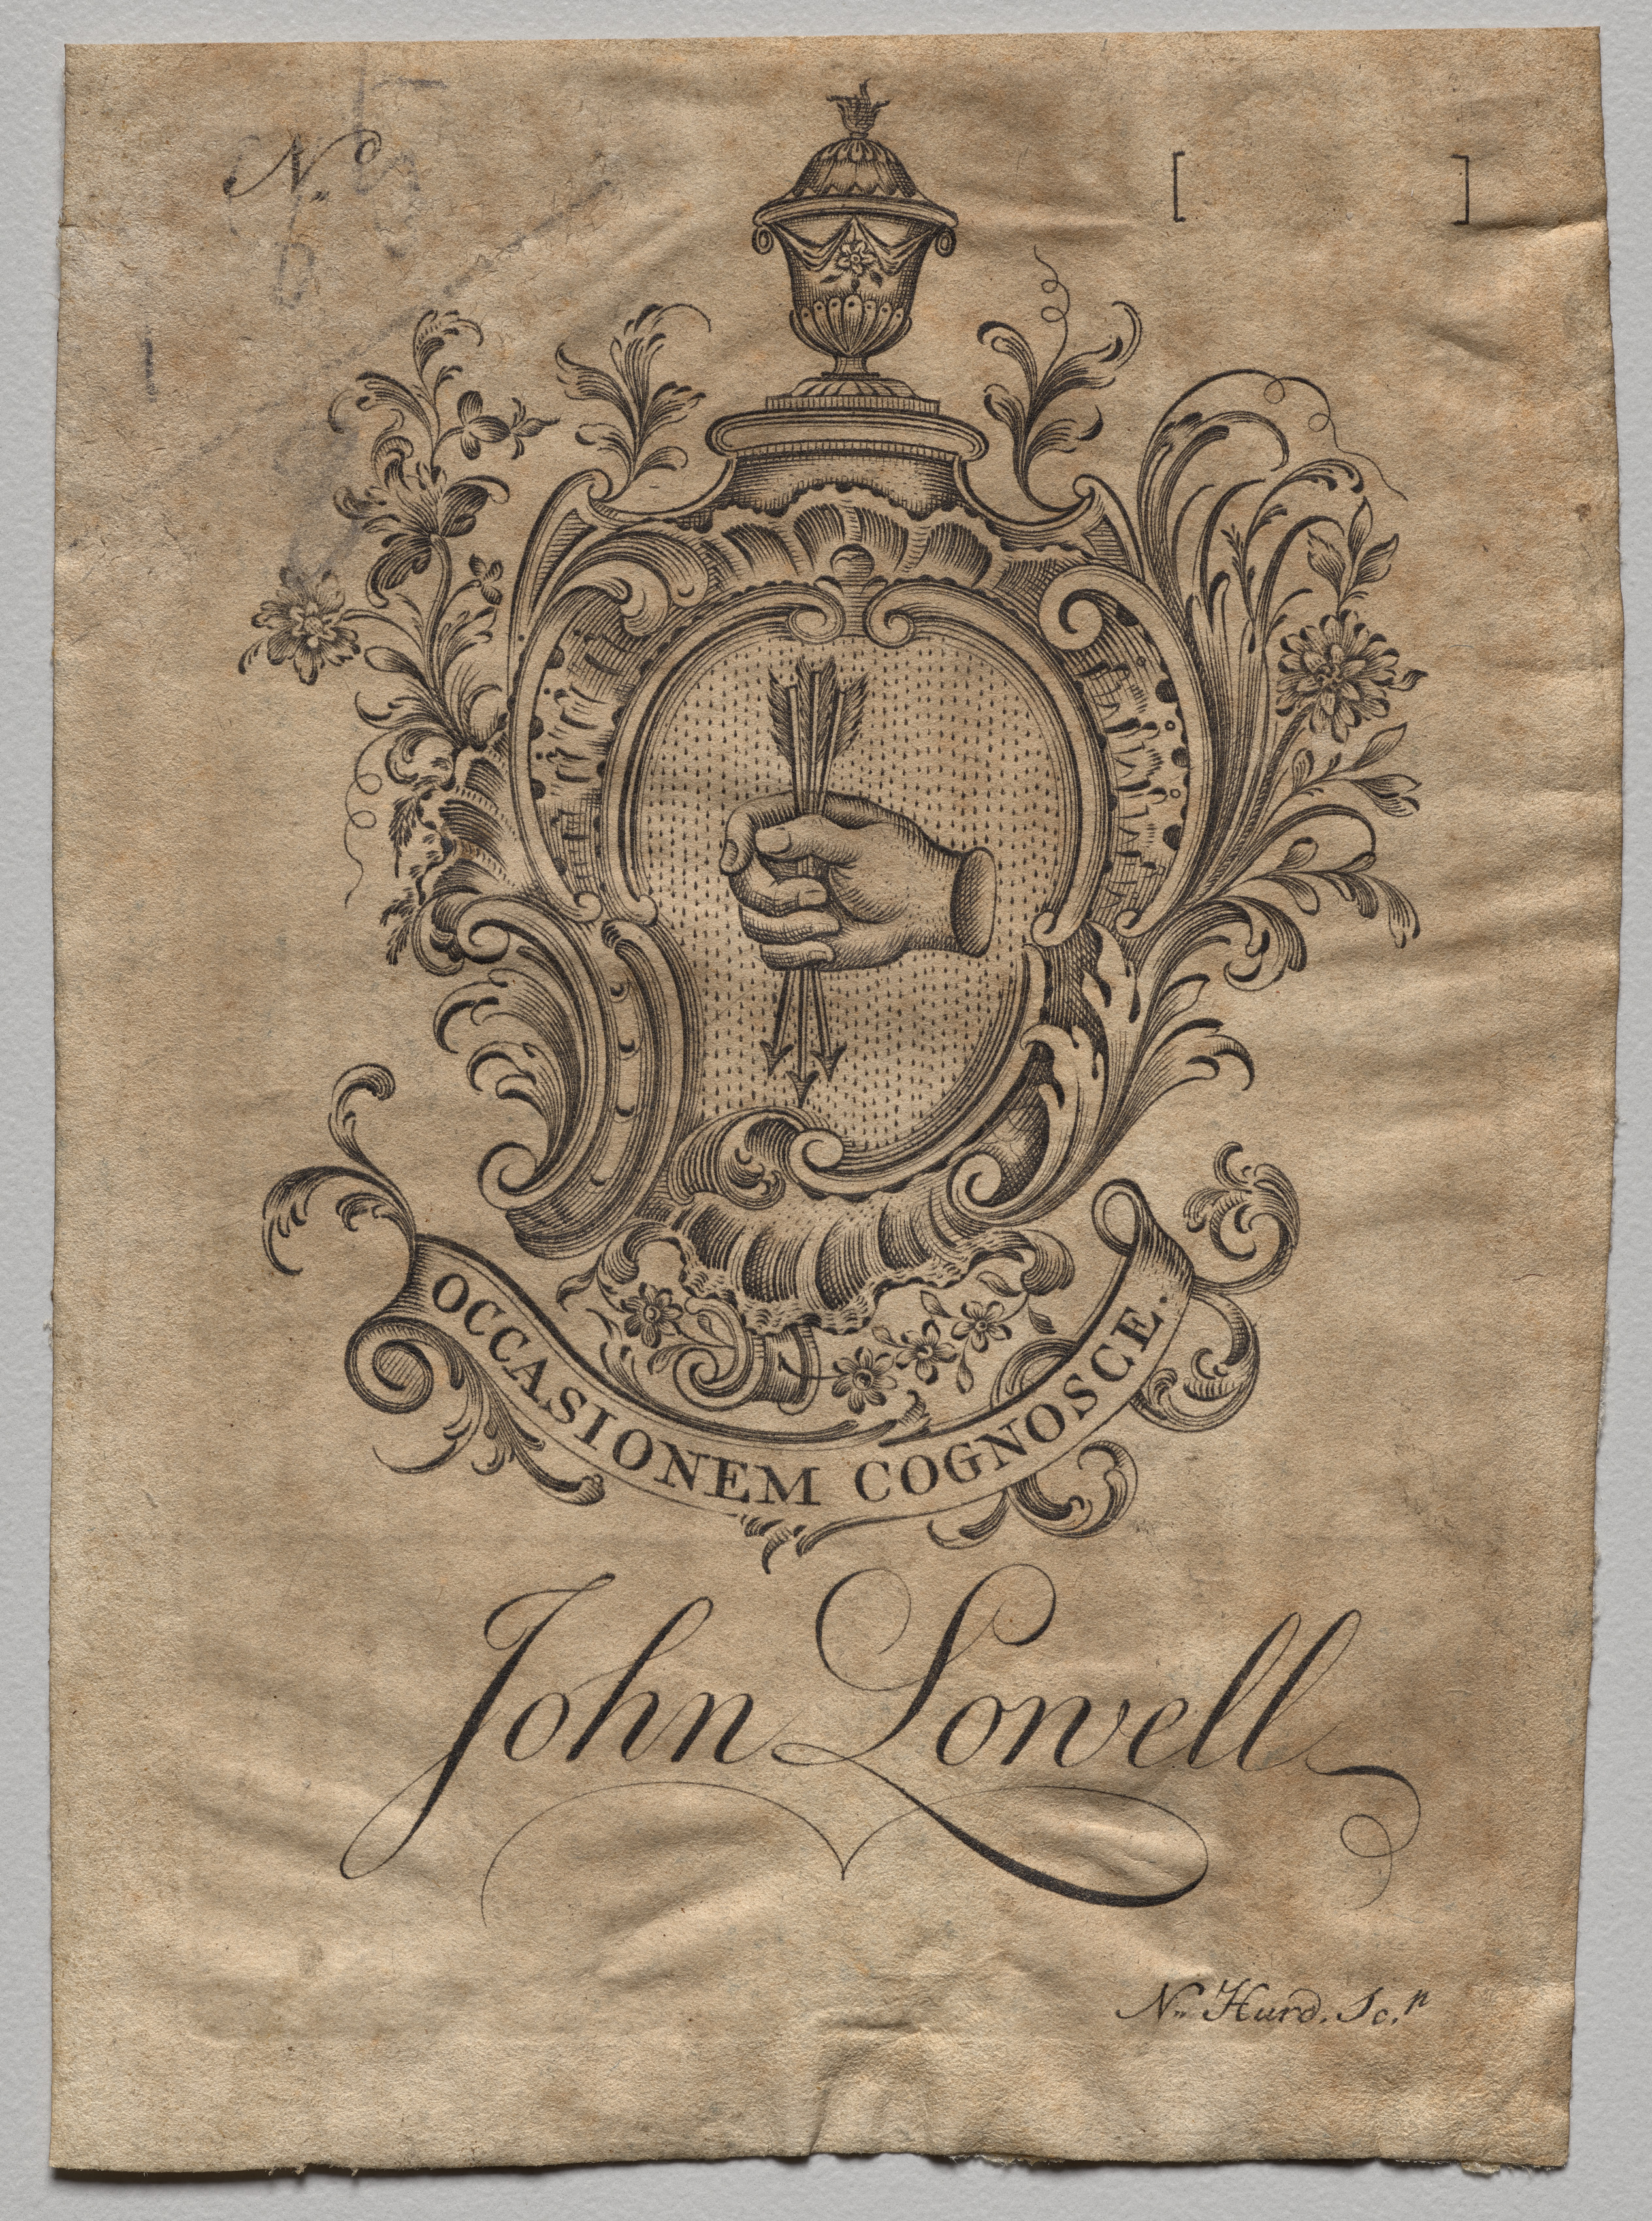 Bookplate:  Coat of Arms with John Lowell inscribed